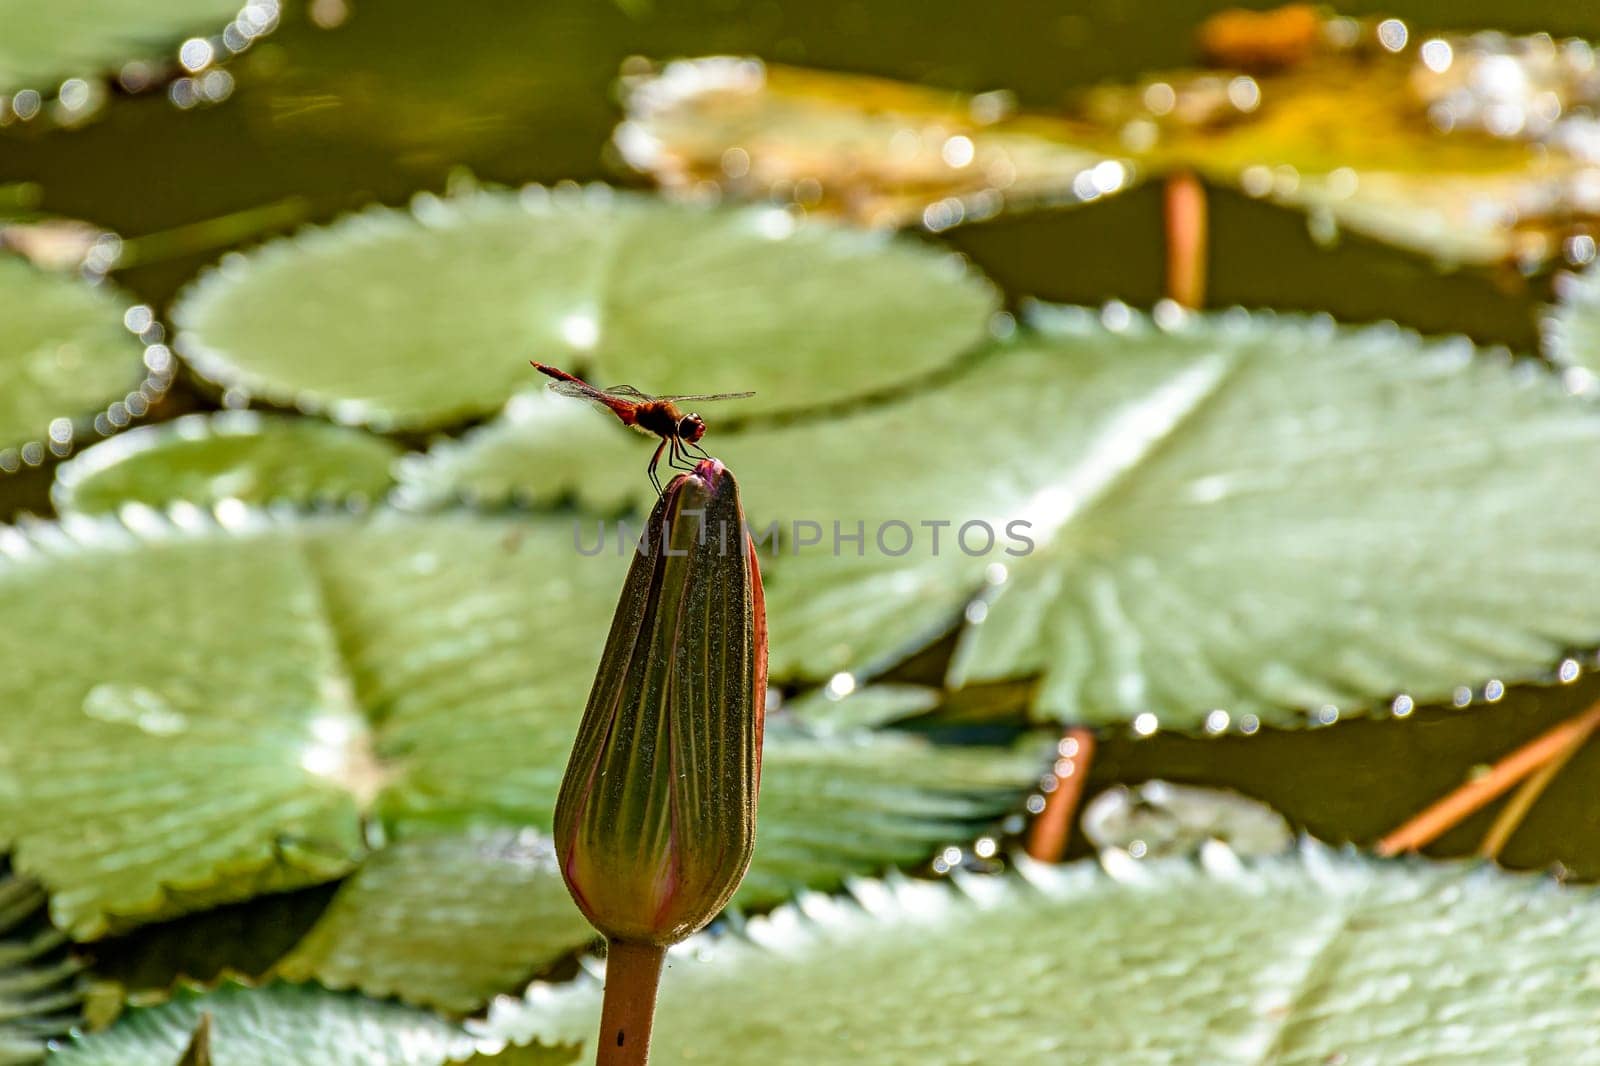 Dragonfly perched on aquatic plant by Fred_Pinheiro